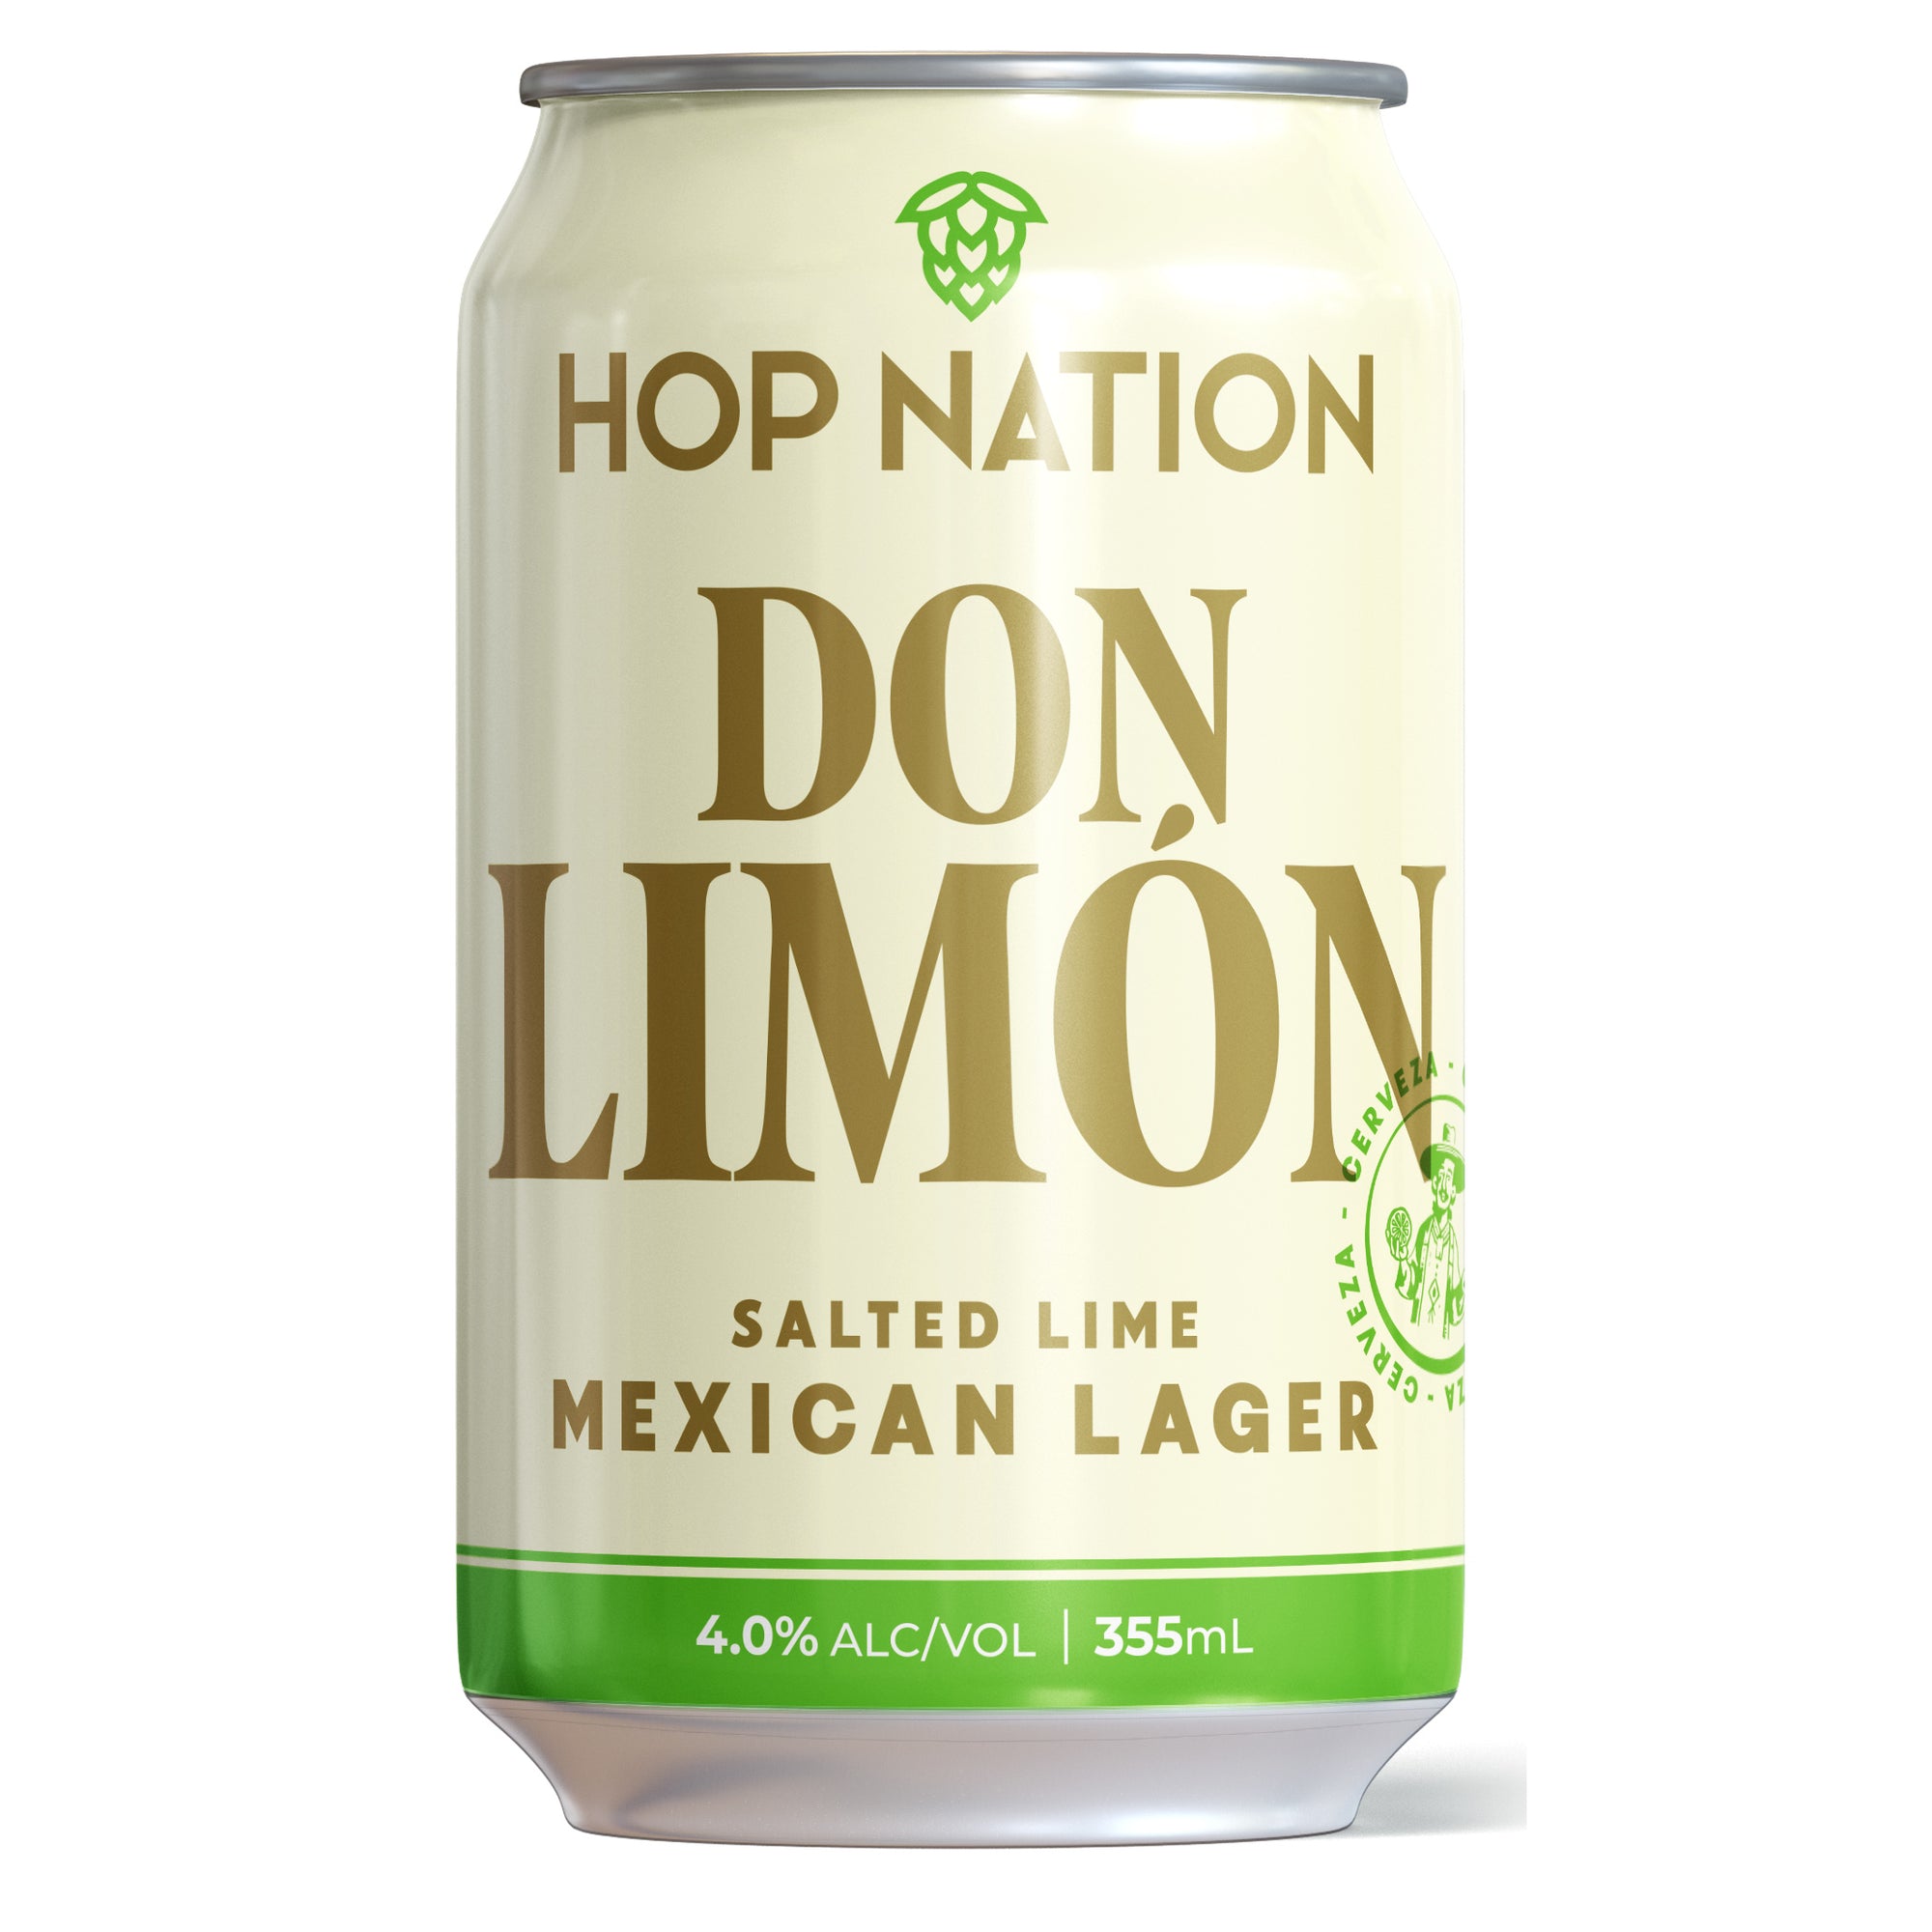 Hop Nation “Don Limon” Mexican Lager (16)